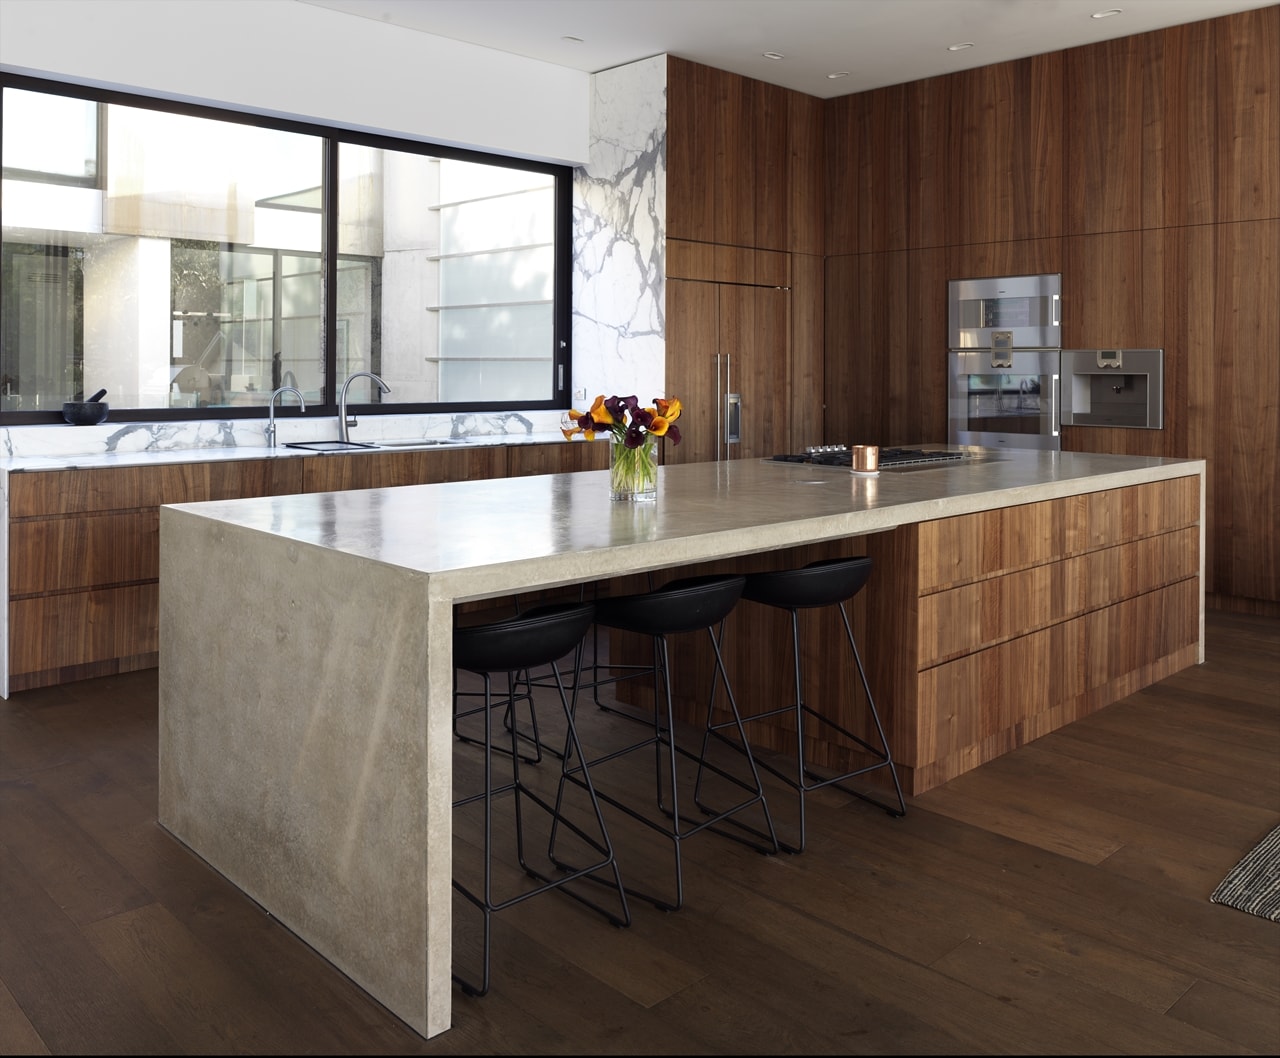 Open concept kitchen with large kitchen island in hillside house designed by Rolf Ockert